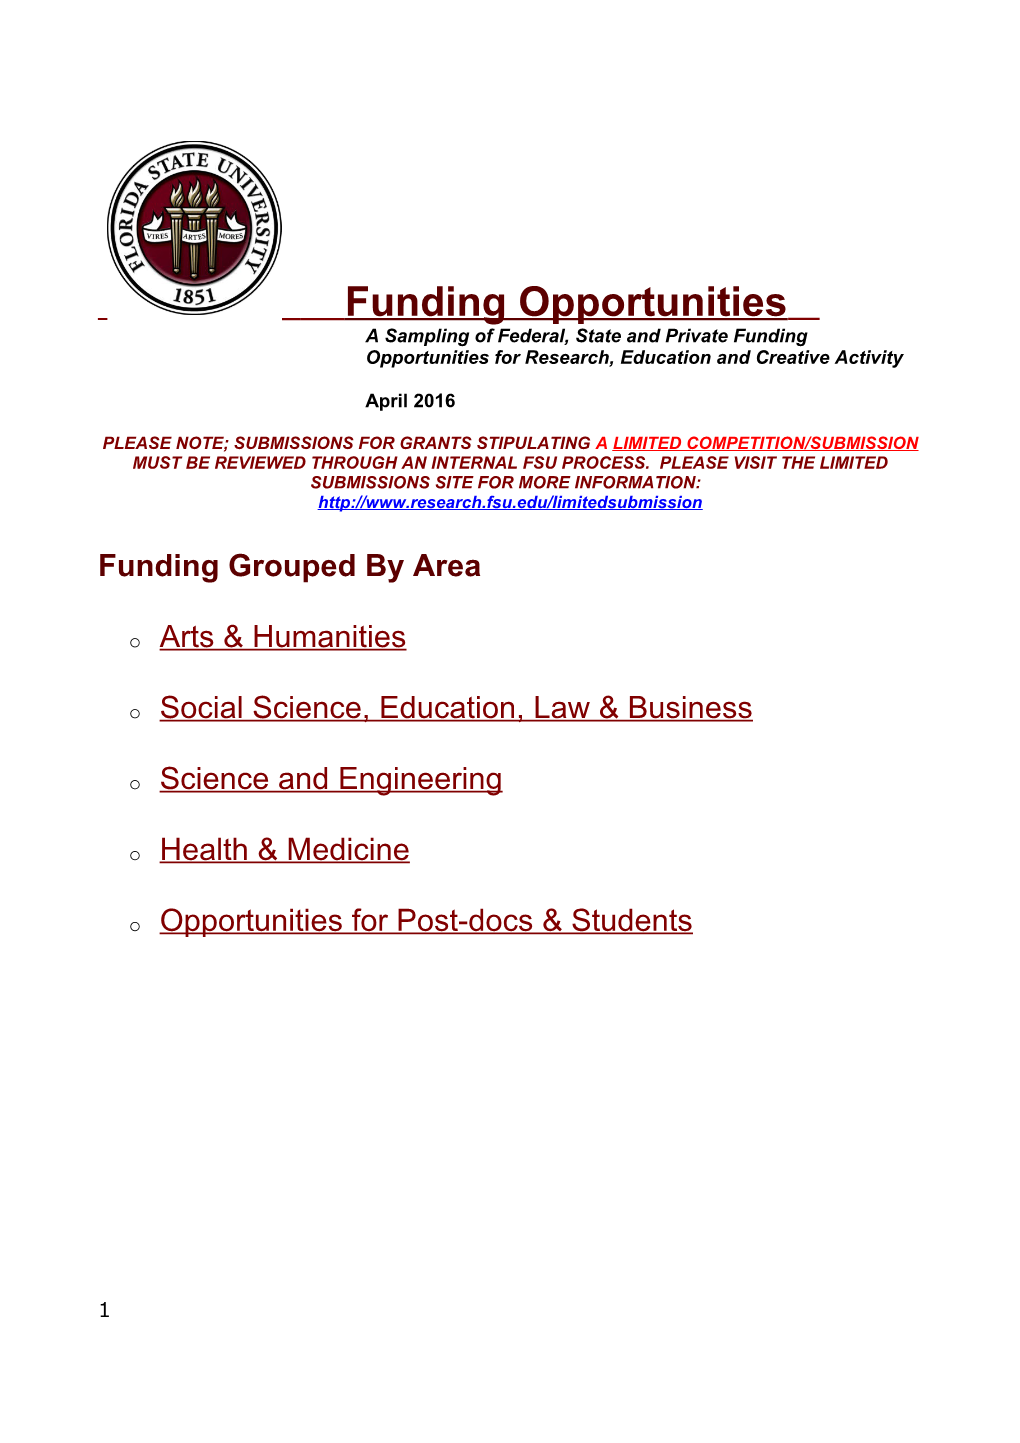 A Sampling of Federal, State and Private Funding Opportunities for Research, Education